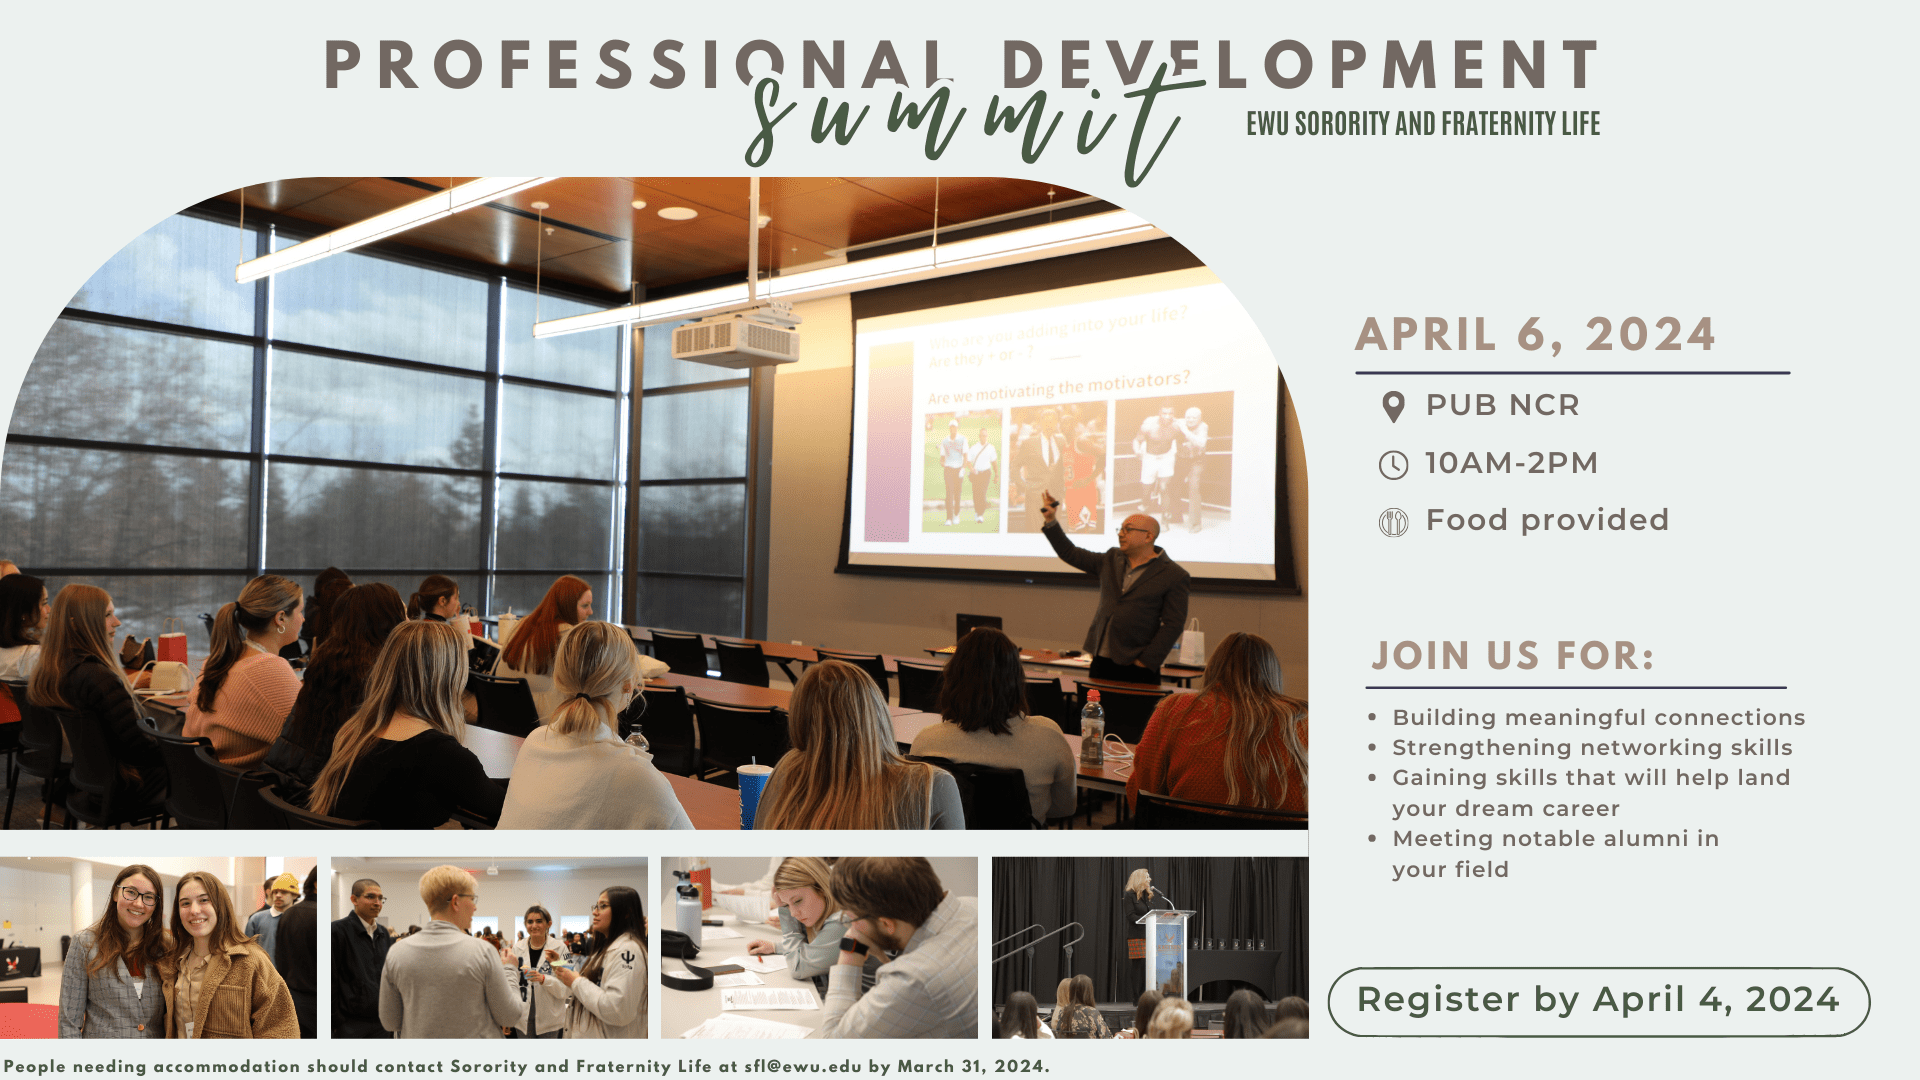 Poster for professional development summit for EWU fraternities and sororities. It is on April 6th, 2024 in the PUB NCR from 10am to 2pm. Food is provided and you must register by April 4th, 2024